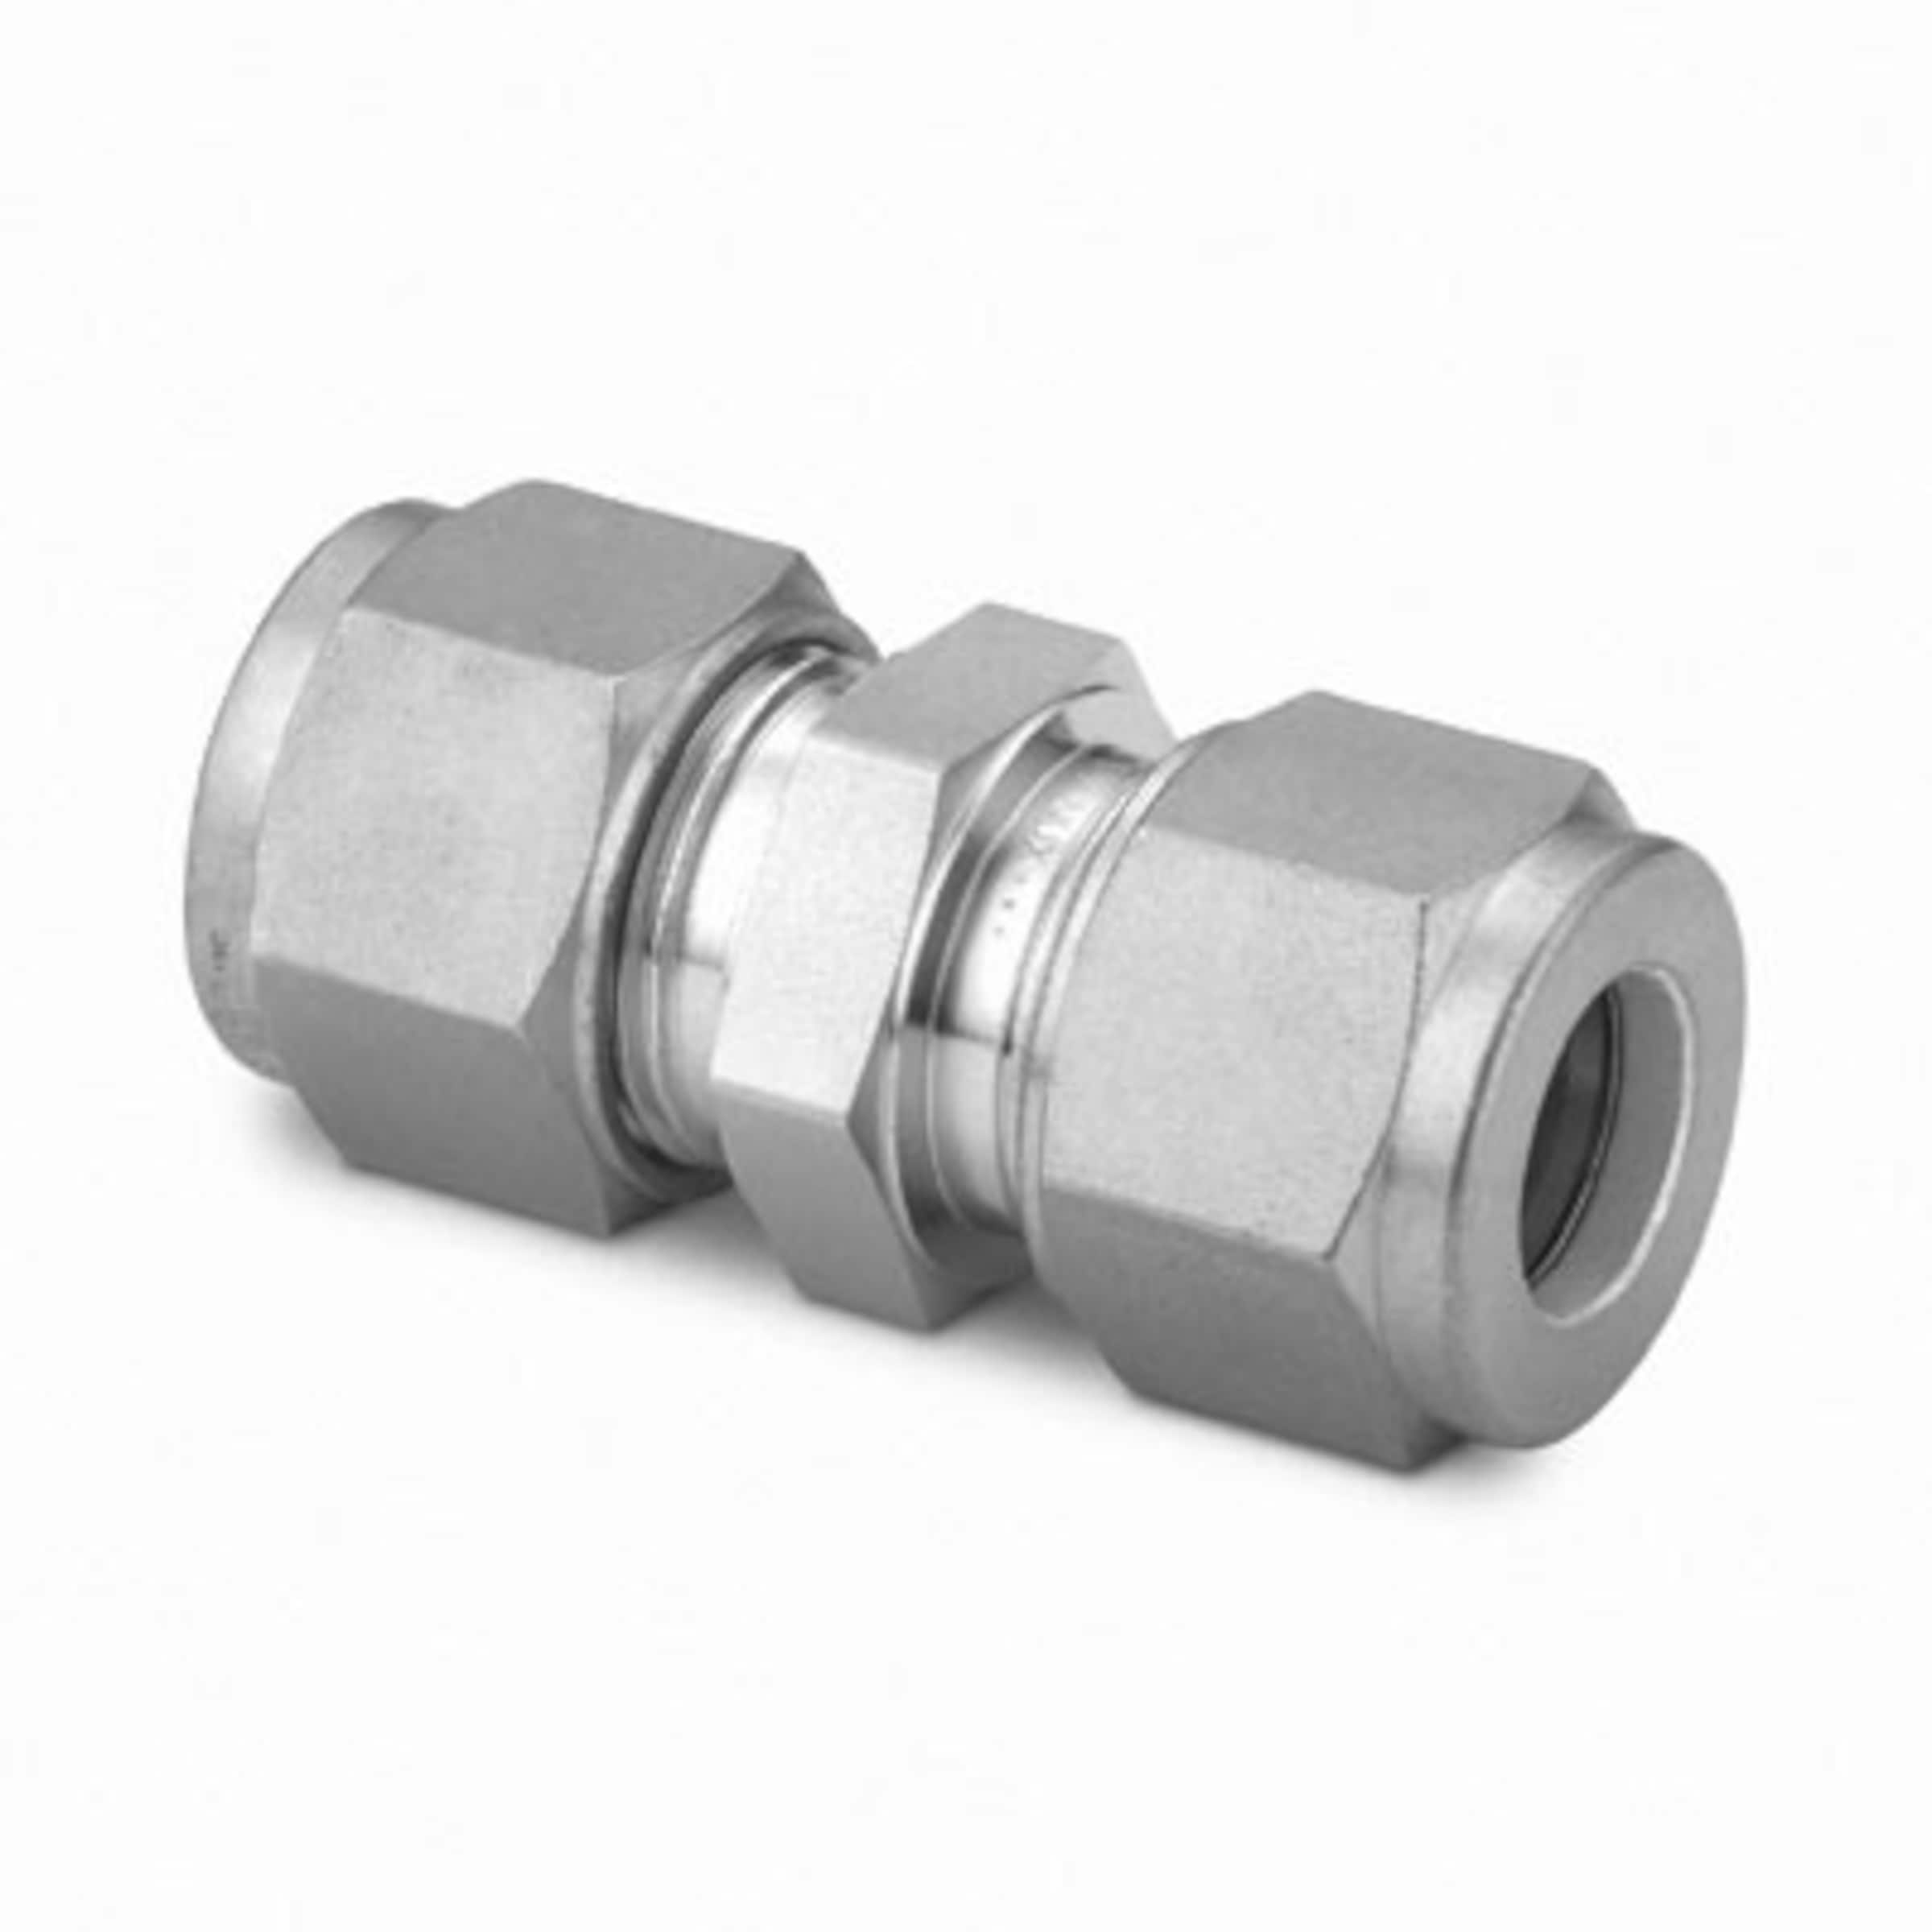 Stainless Steel Swagelok Tube Fitting, Union, 6 mm Tube OD, Unions, Tube  Fittings and Adapters, Fittings, All Products